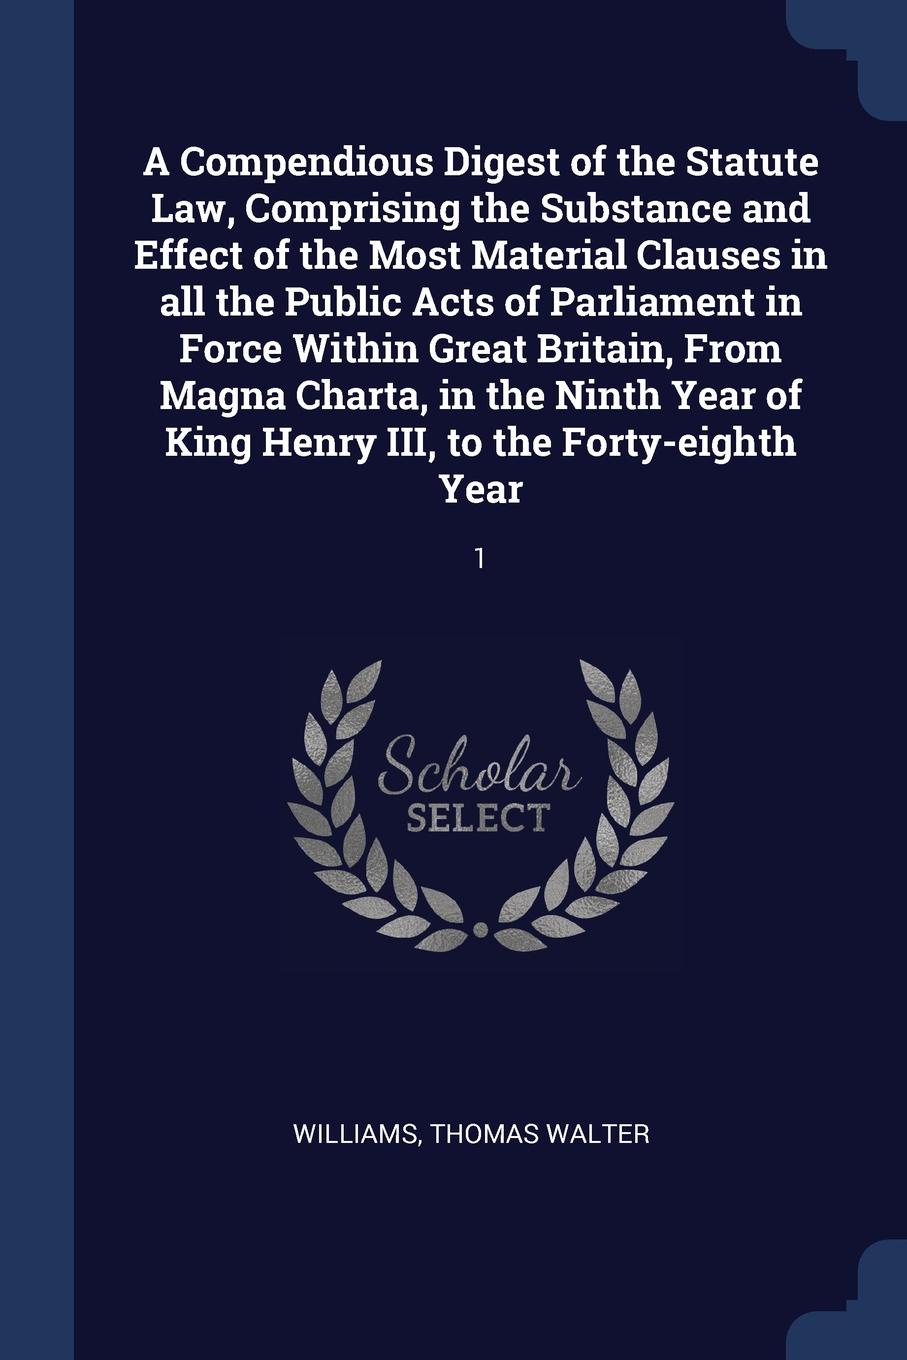 A Compendious Digest of the Statute Law, Comprising the Substance and Effect of the Most Material Clauses in all the Public Acts of Parliament in Force Within Great Britain, From Magna Charta, in the Ninth Year of King Henry III, to the Forty-eigh...